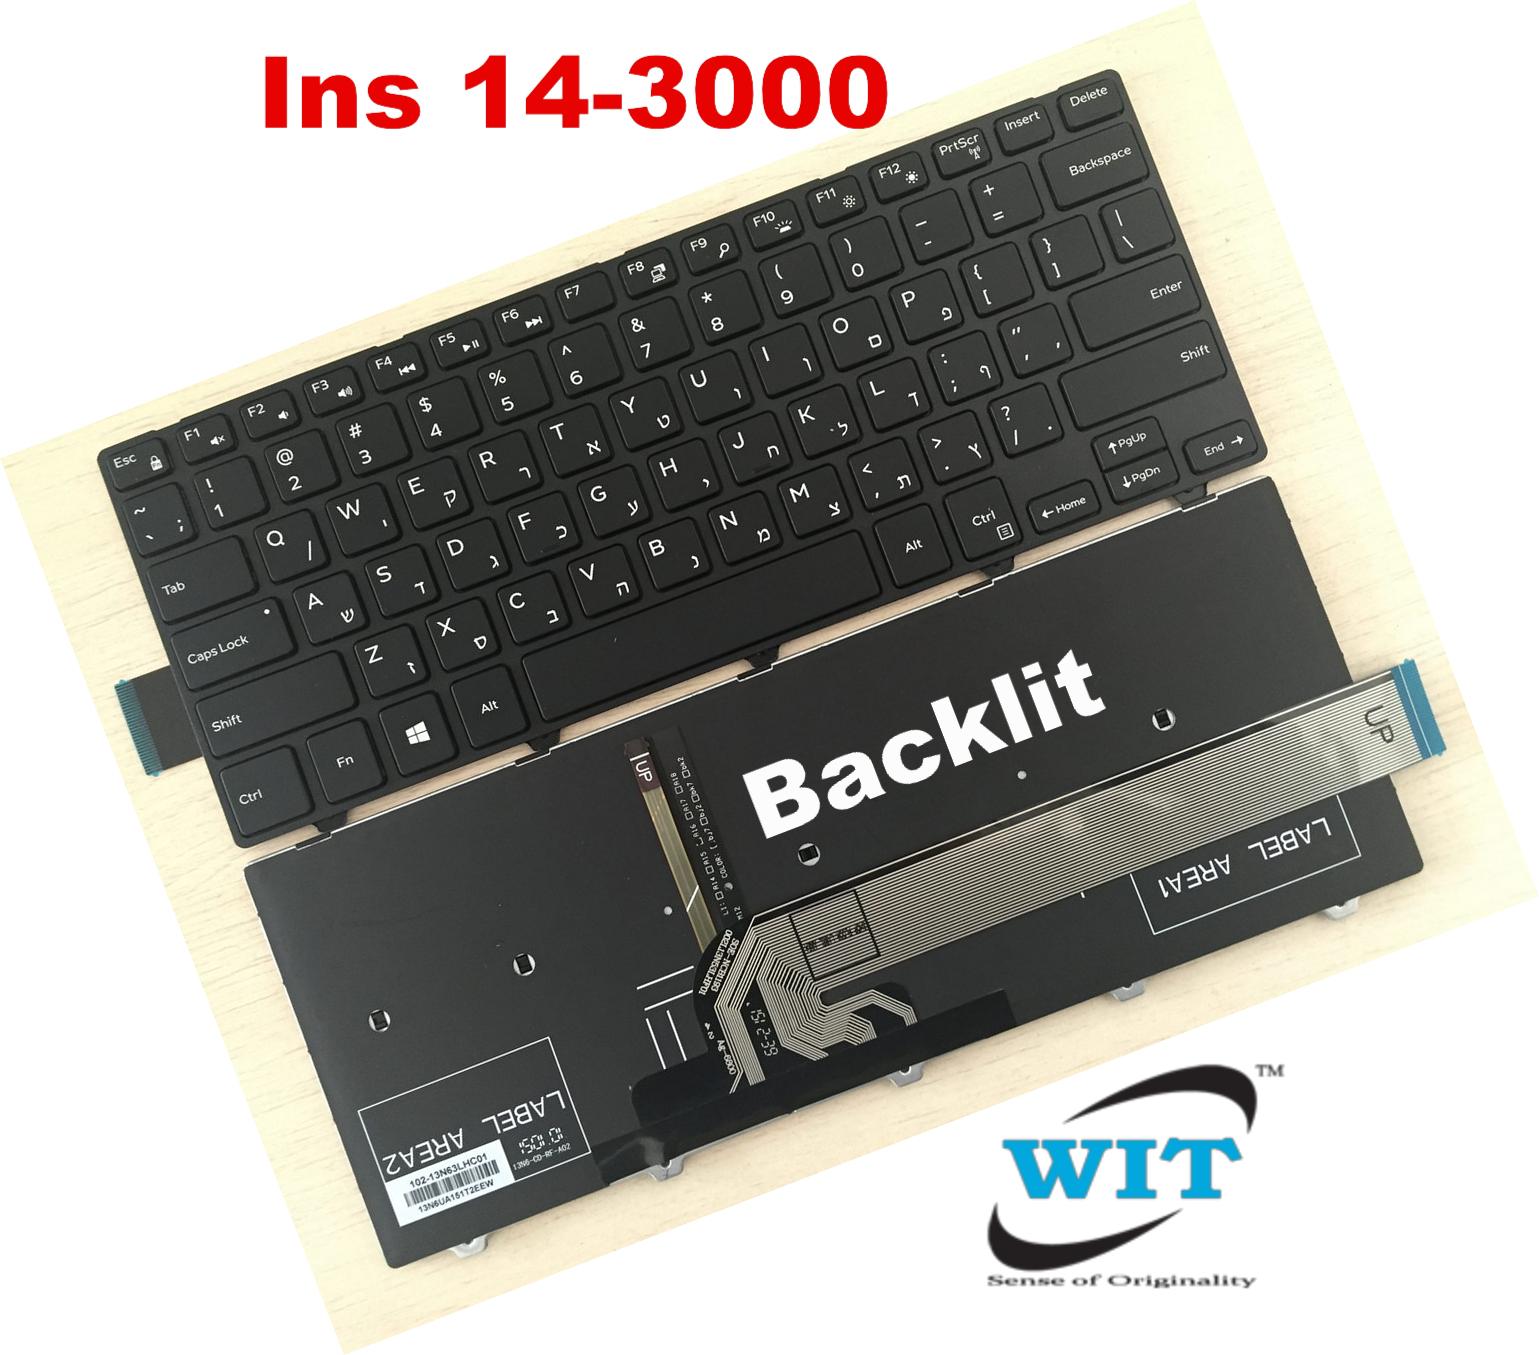 14 5000 5442 5445 5446 5447 5451 US MP-13N63U4J698 PK1313P3B09 Laptop Replacement Keyboard with Backlight Backlit Keyboard for Dell inspiron 14 3000 3441 3442 3443 3451 3458 3446 3447